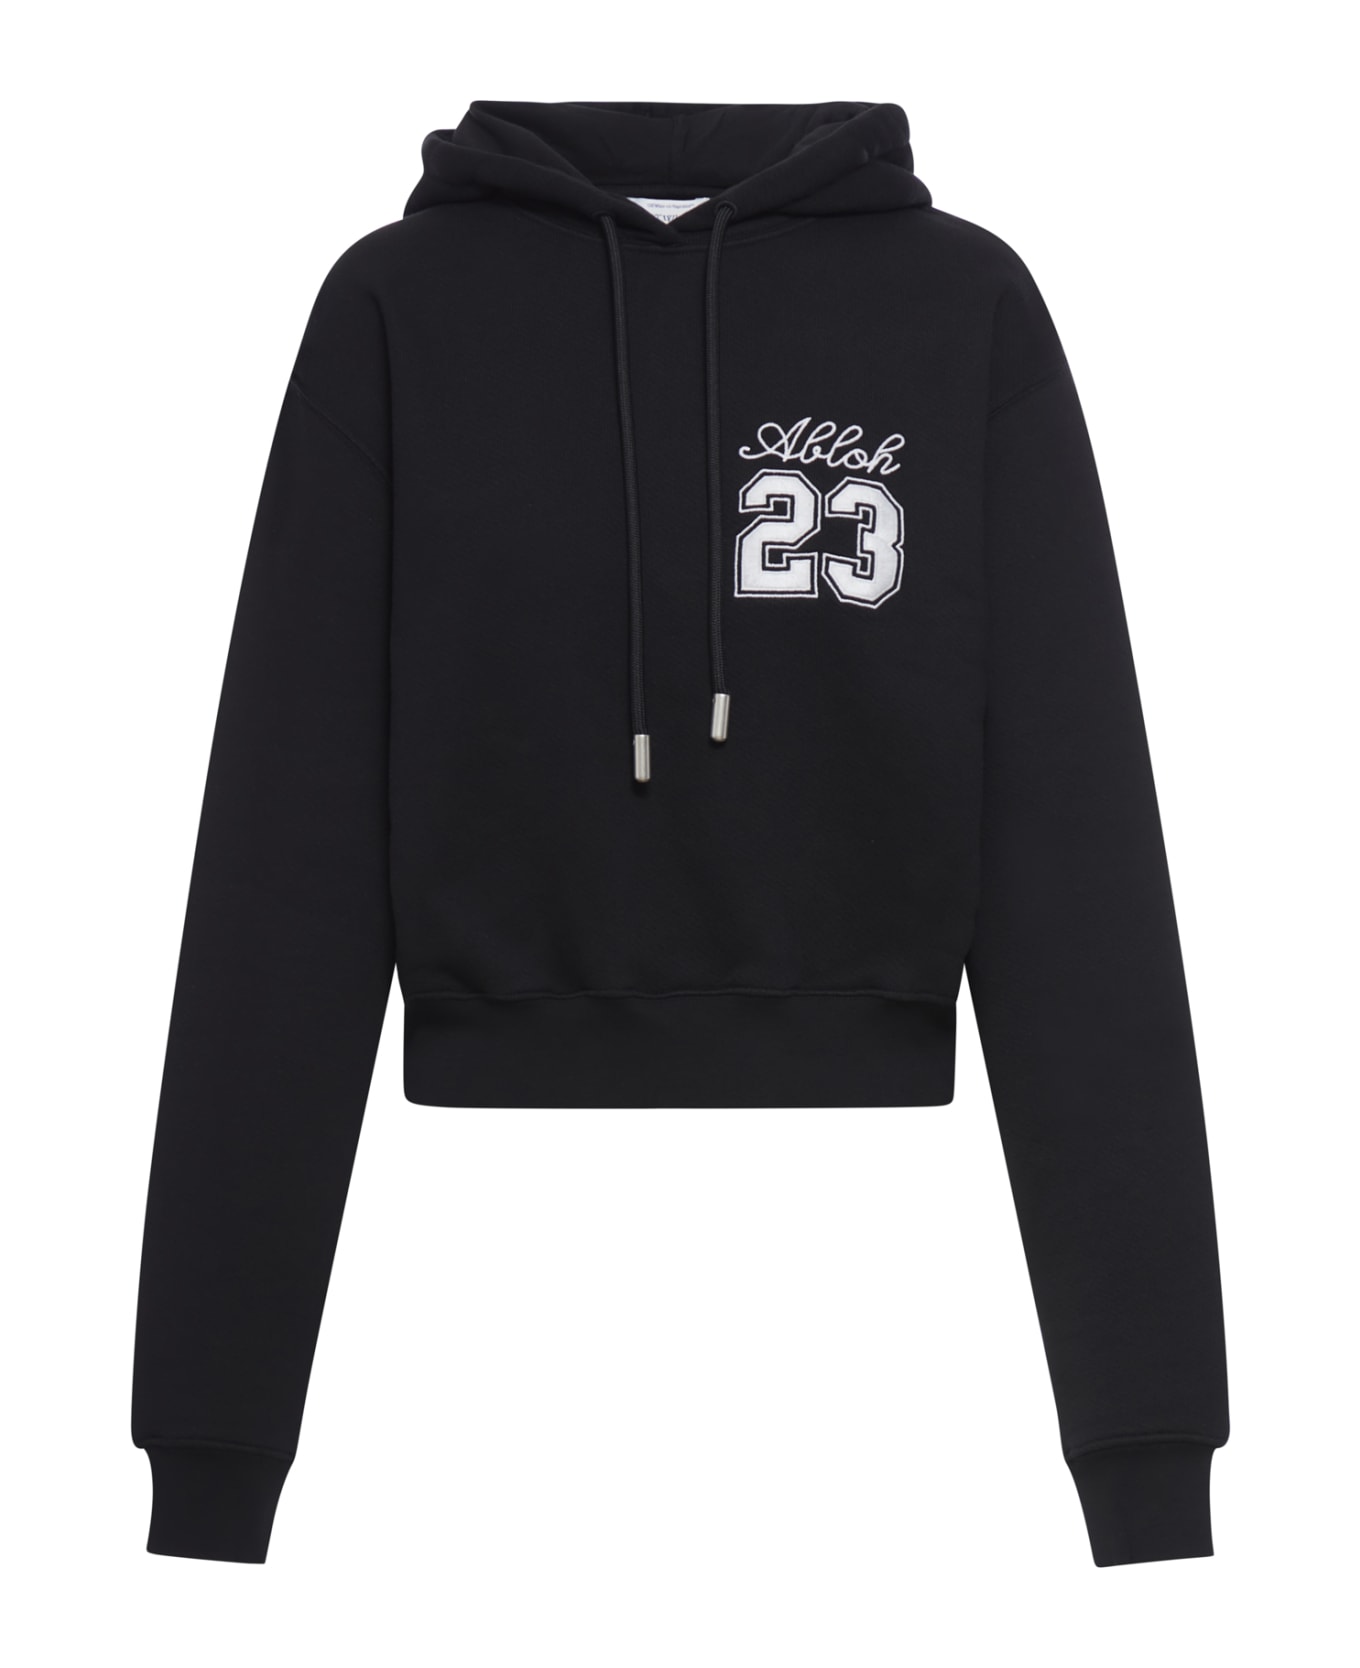 Off-White Ow 23 Embr Cropped Hoodie - Black White フリース